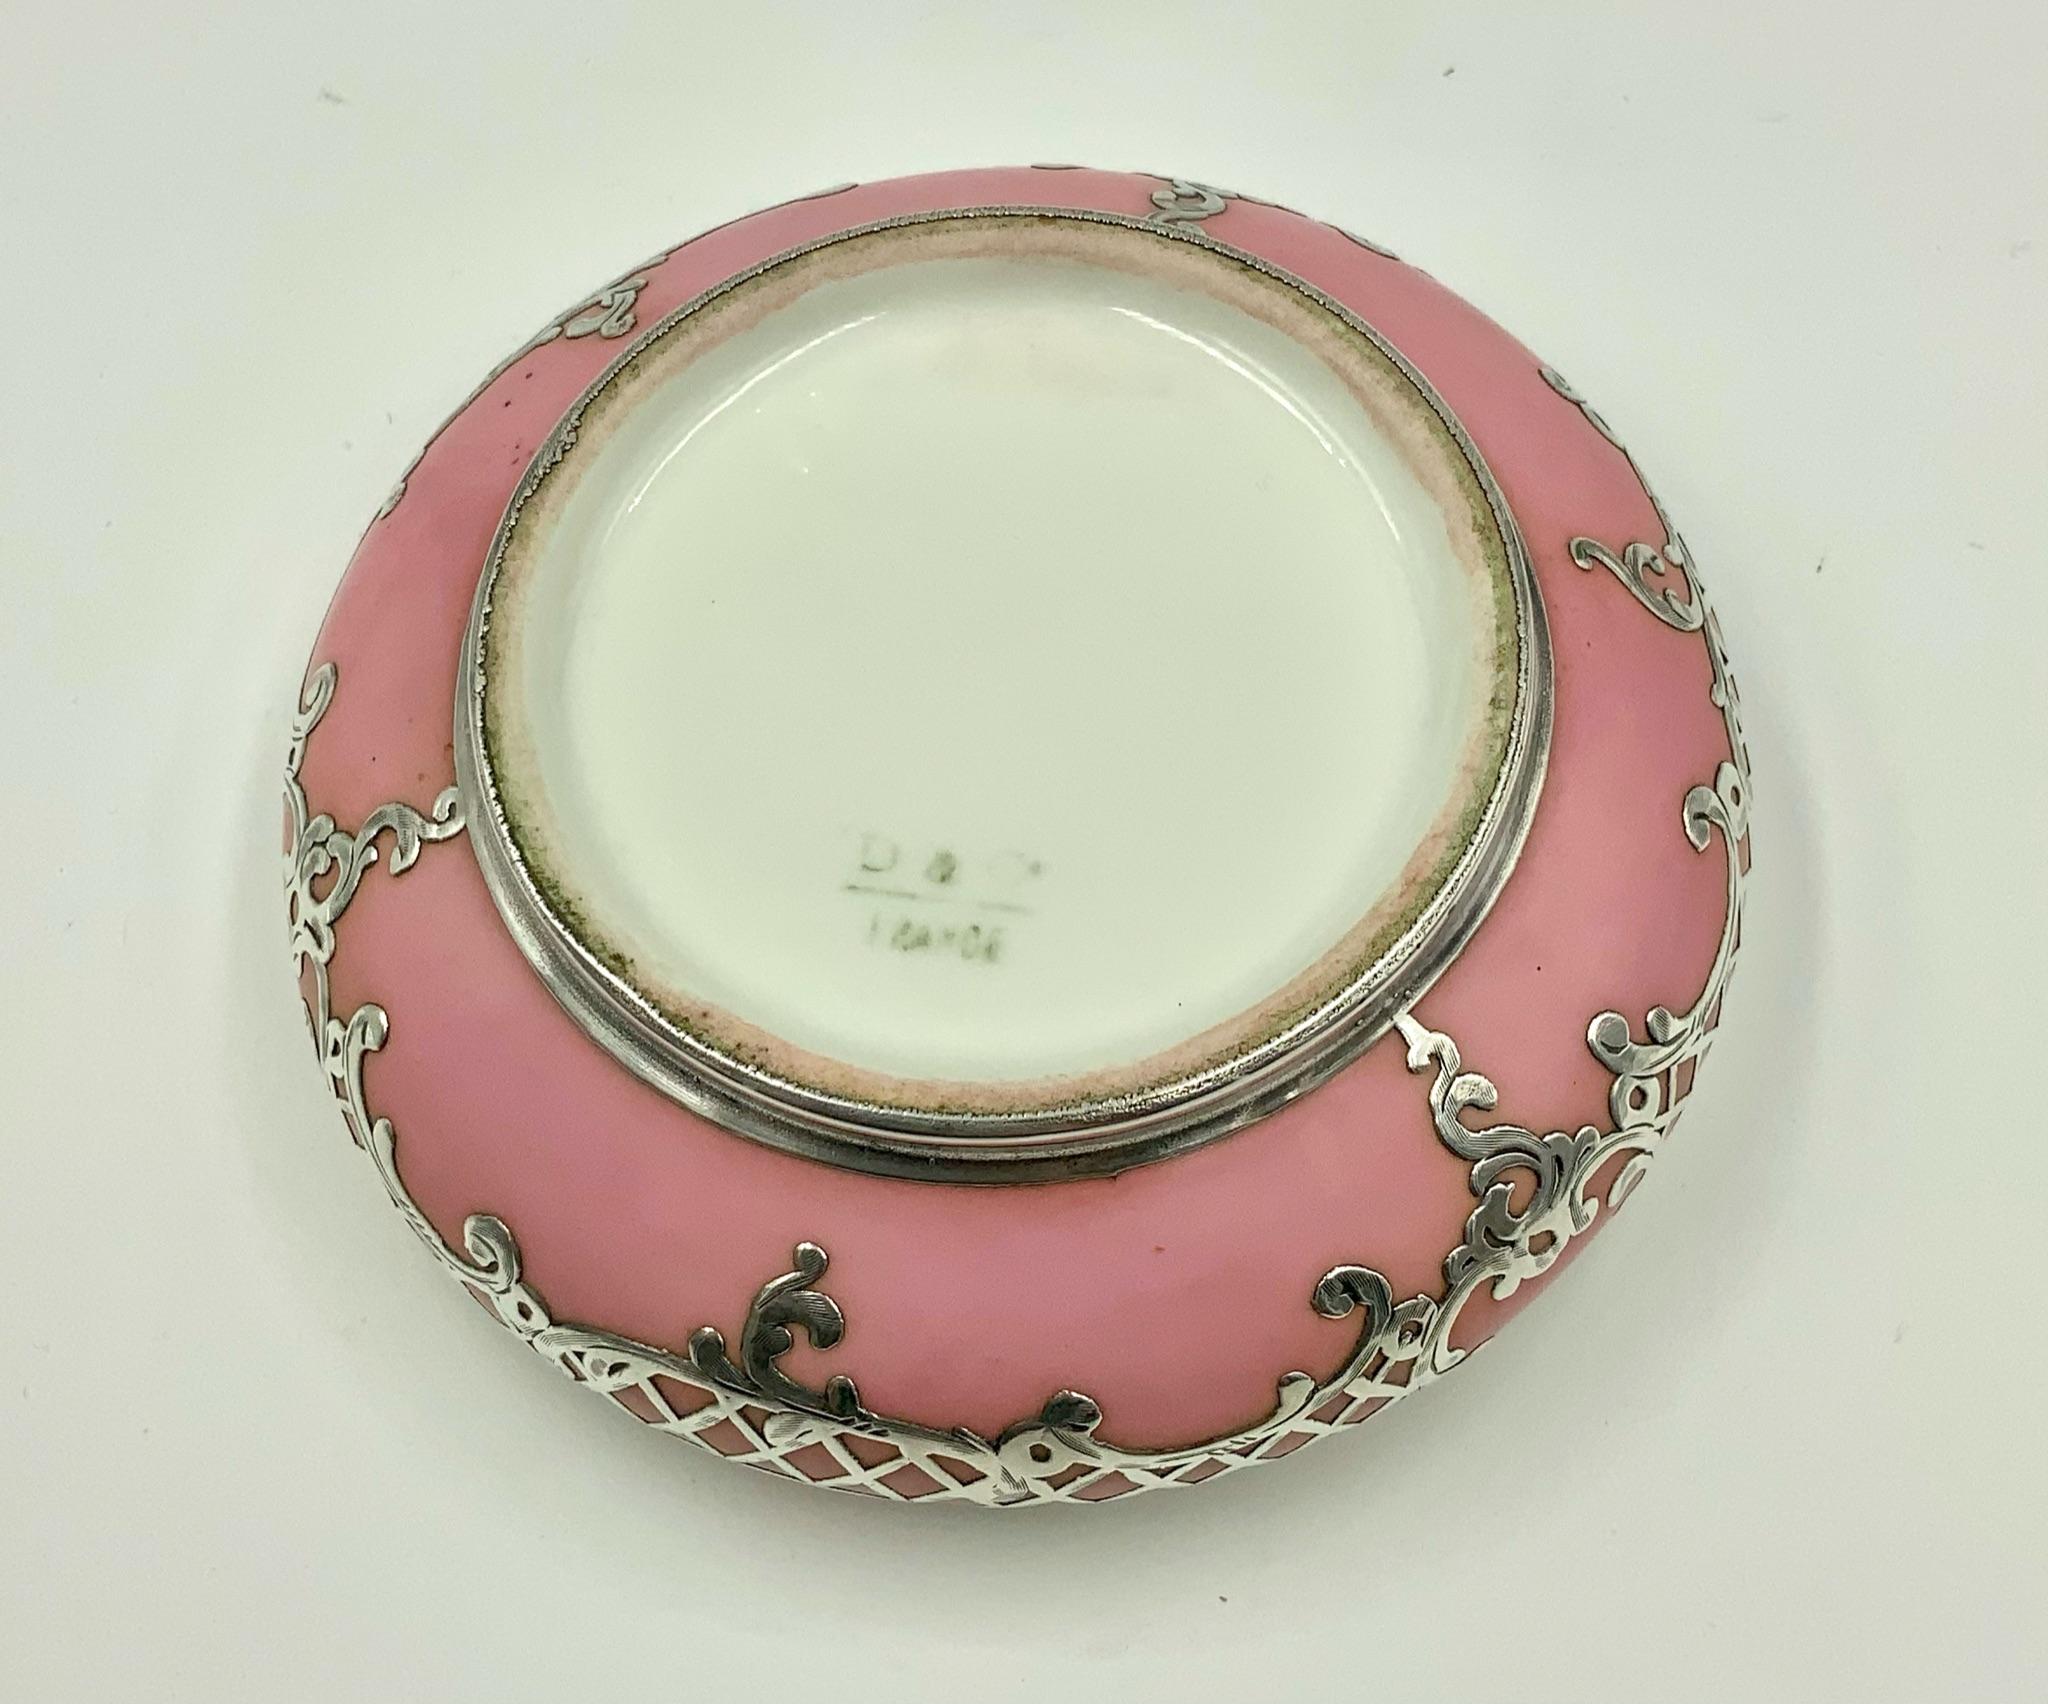 Ornate Antique Sterling Silver Pink Porcelain Vanity Powder Jar Trinket Box In Good Condition For Sale In Miami Beach, FL